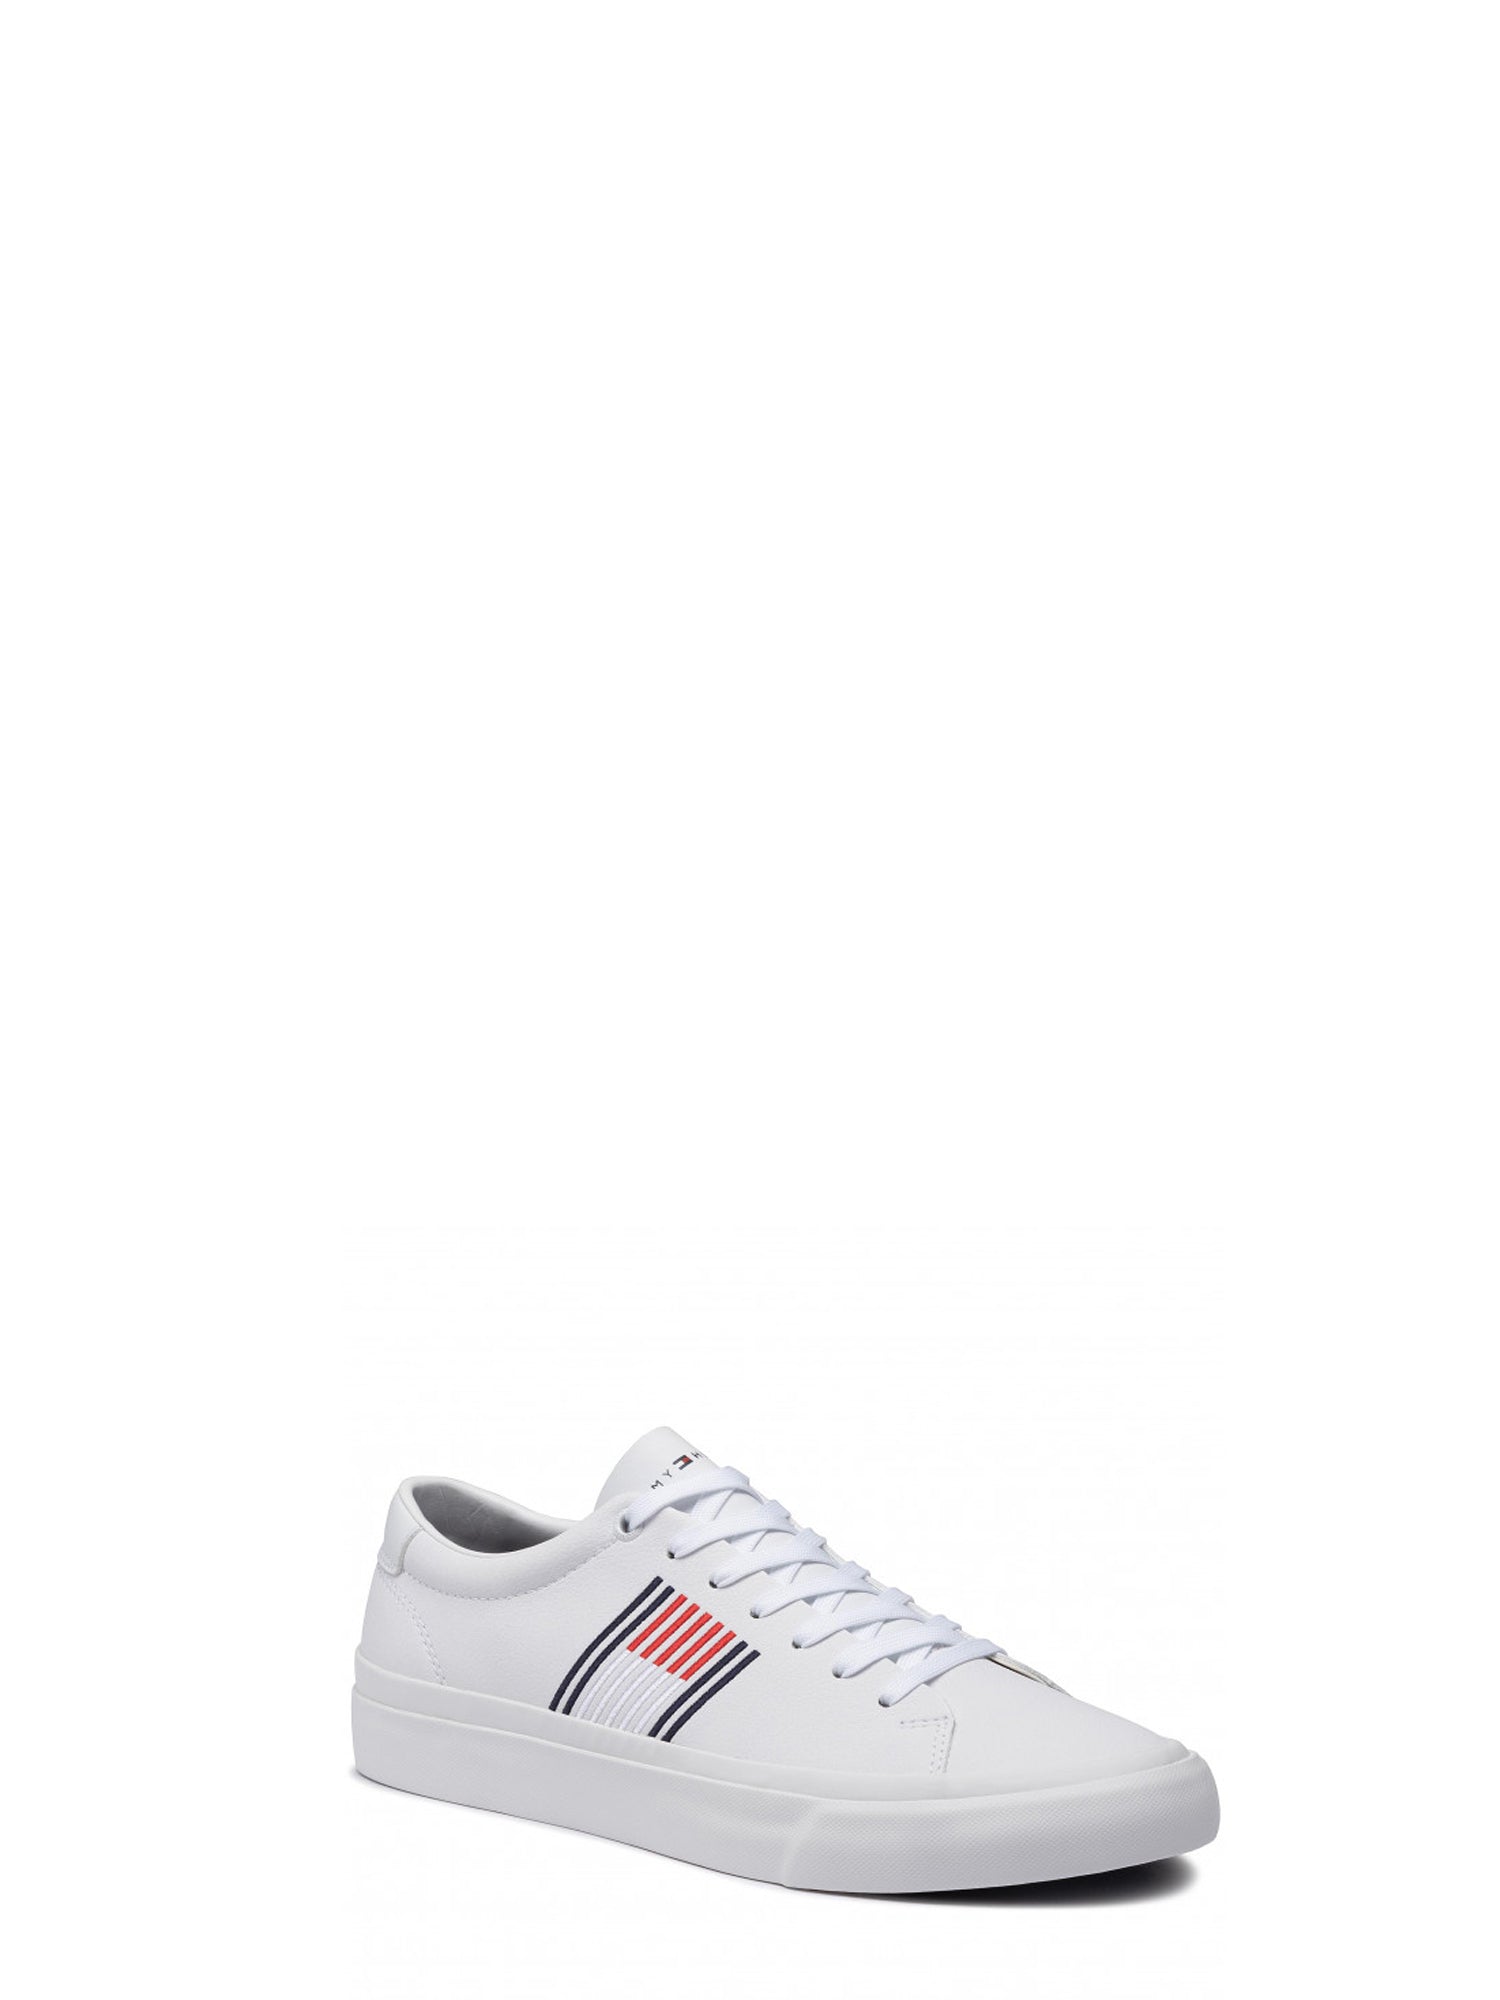 TOMMY HILFIGER SHOES SNEAKERS